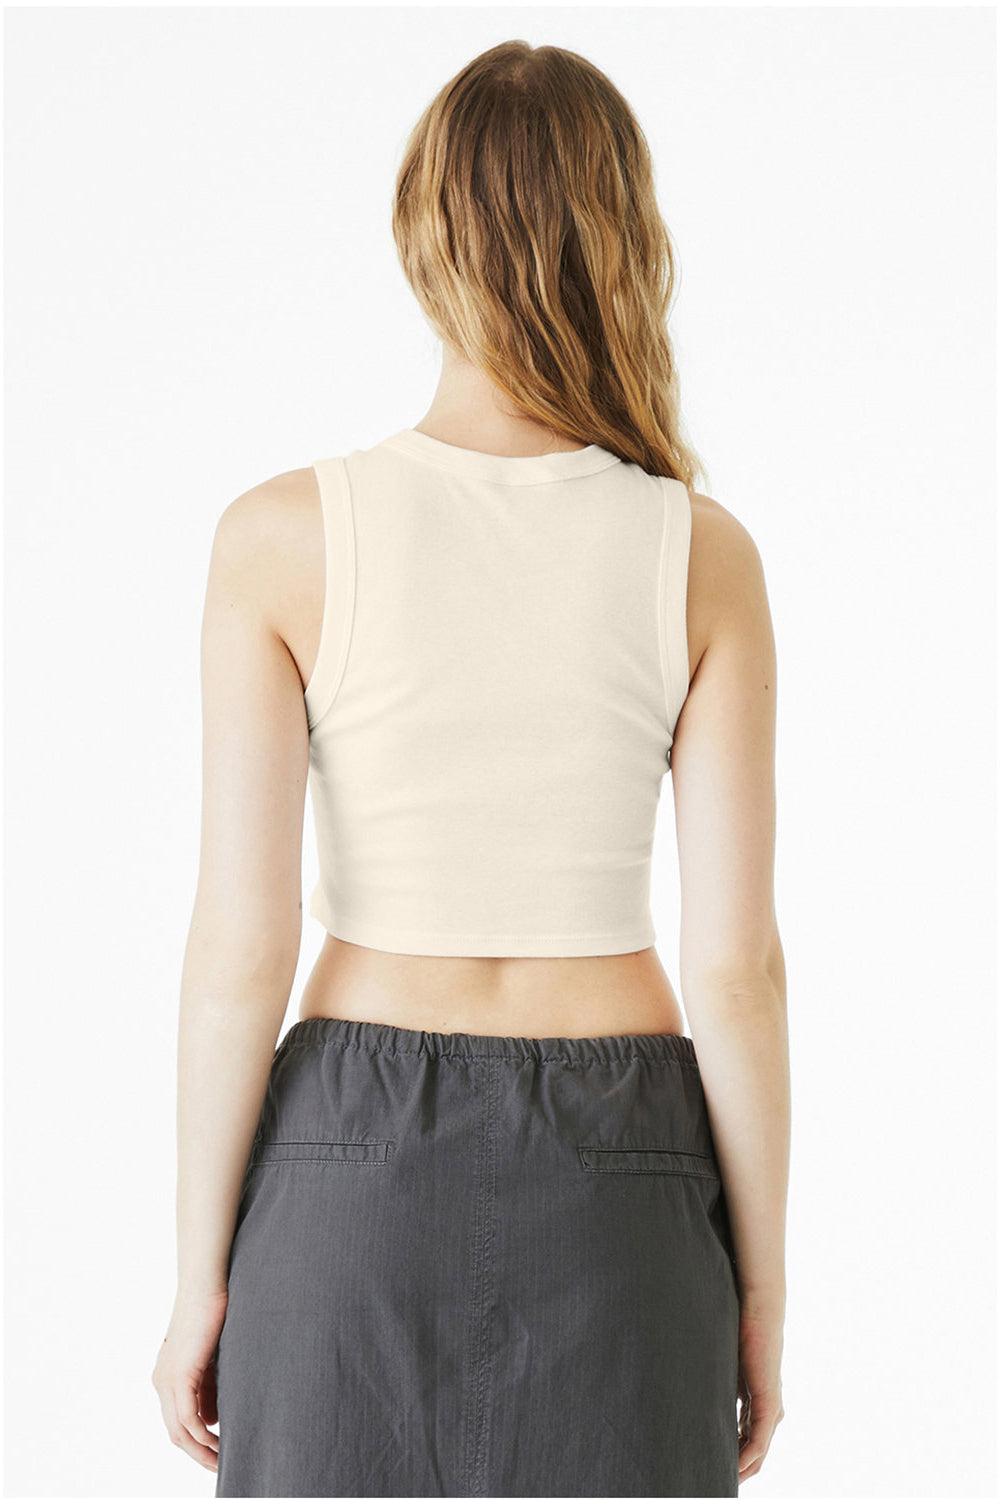 Bella + Canvas 1013BE Womens Micro Ribbed Muscle Crop Tank Top Natural Model Back